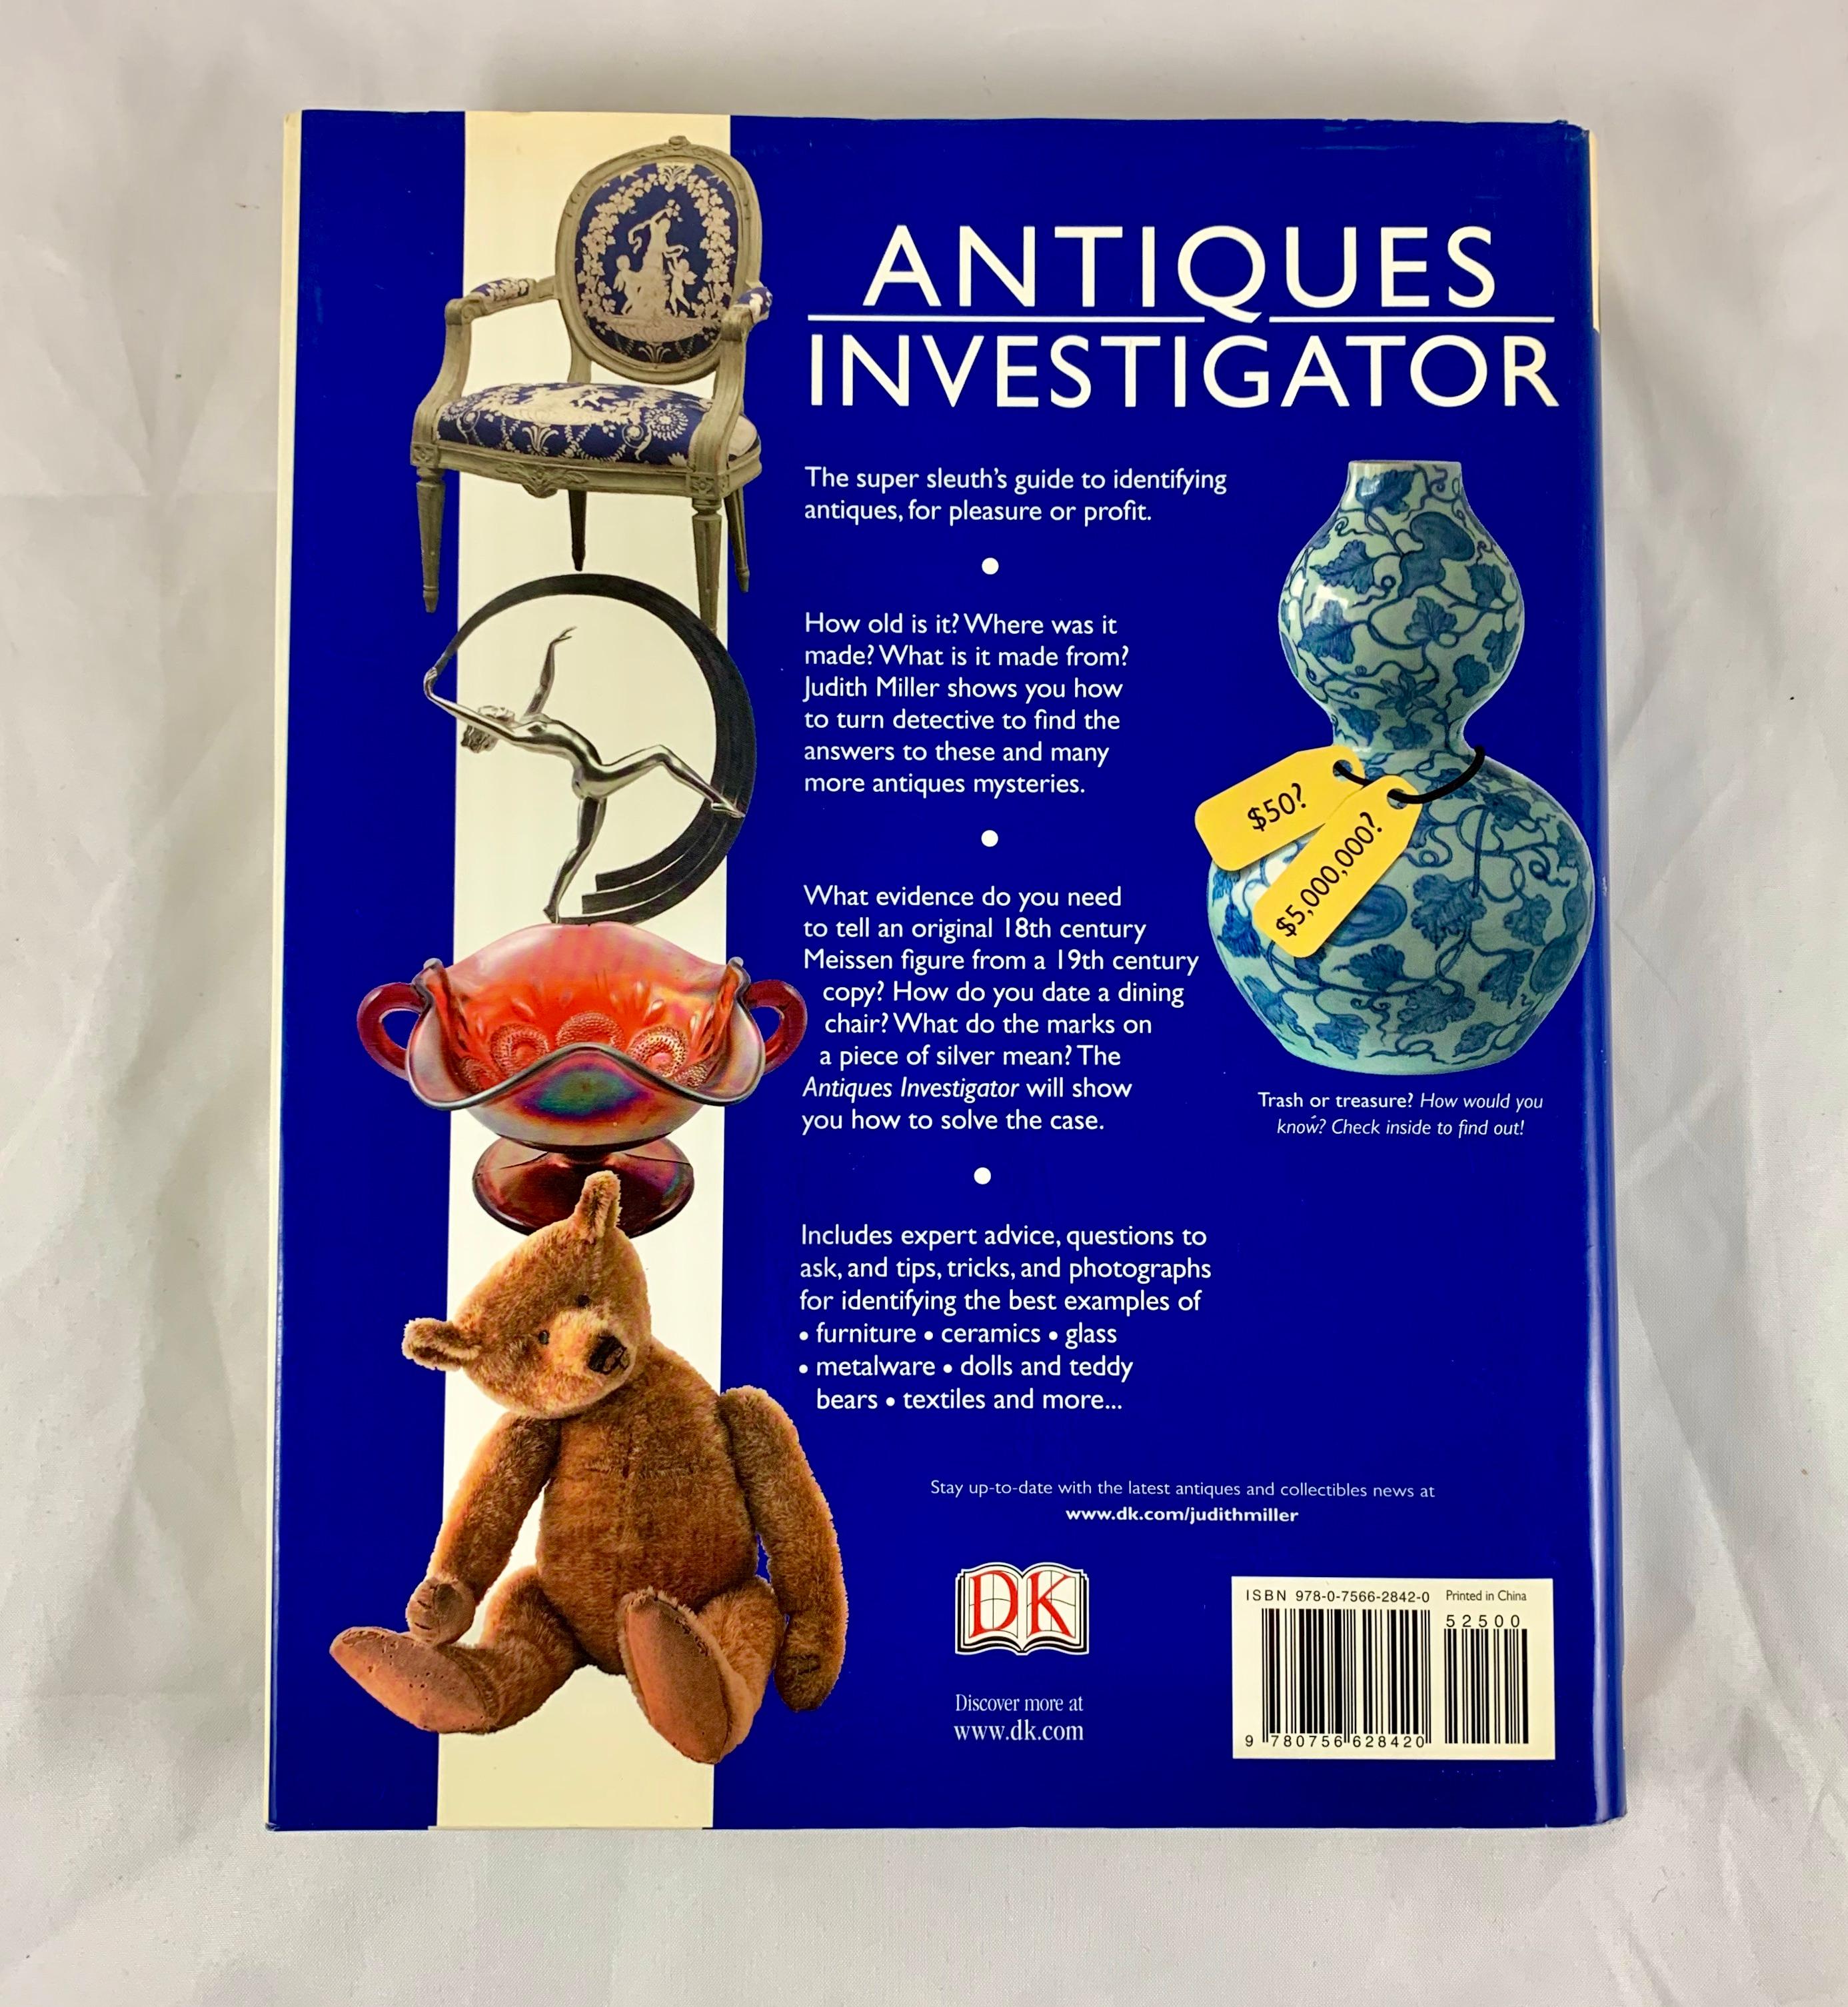 Antiques investigator, tips and tricks to help you find the real deal for antiques and collectibles, written by the UK antiques expert Judith Miller.

The world renowned antiques expert explains how to identify a real antique, a reproduction or a